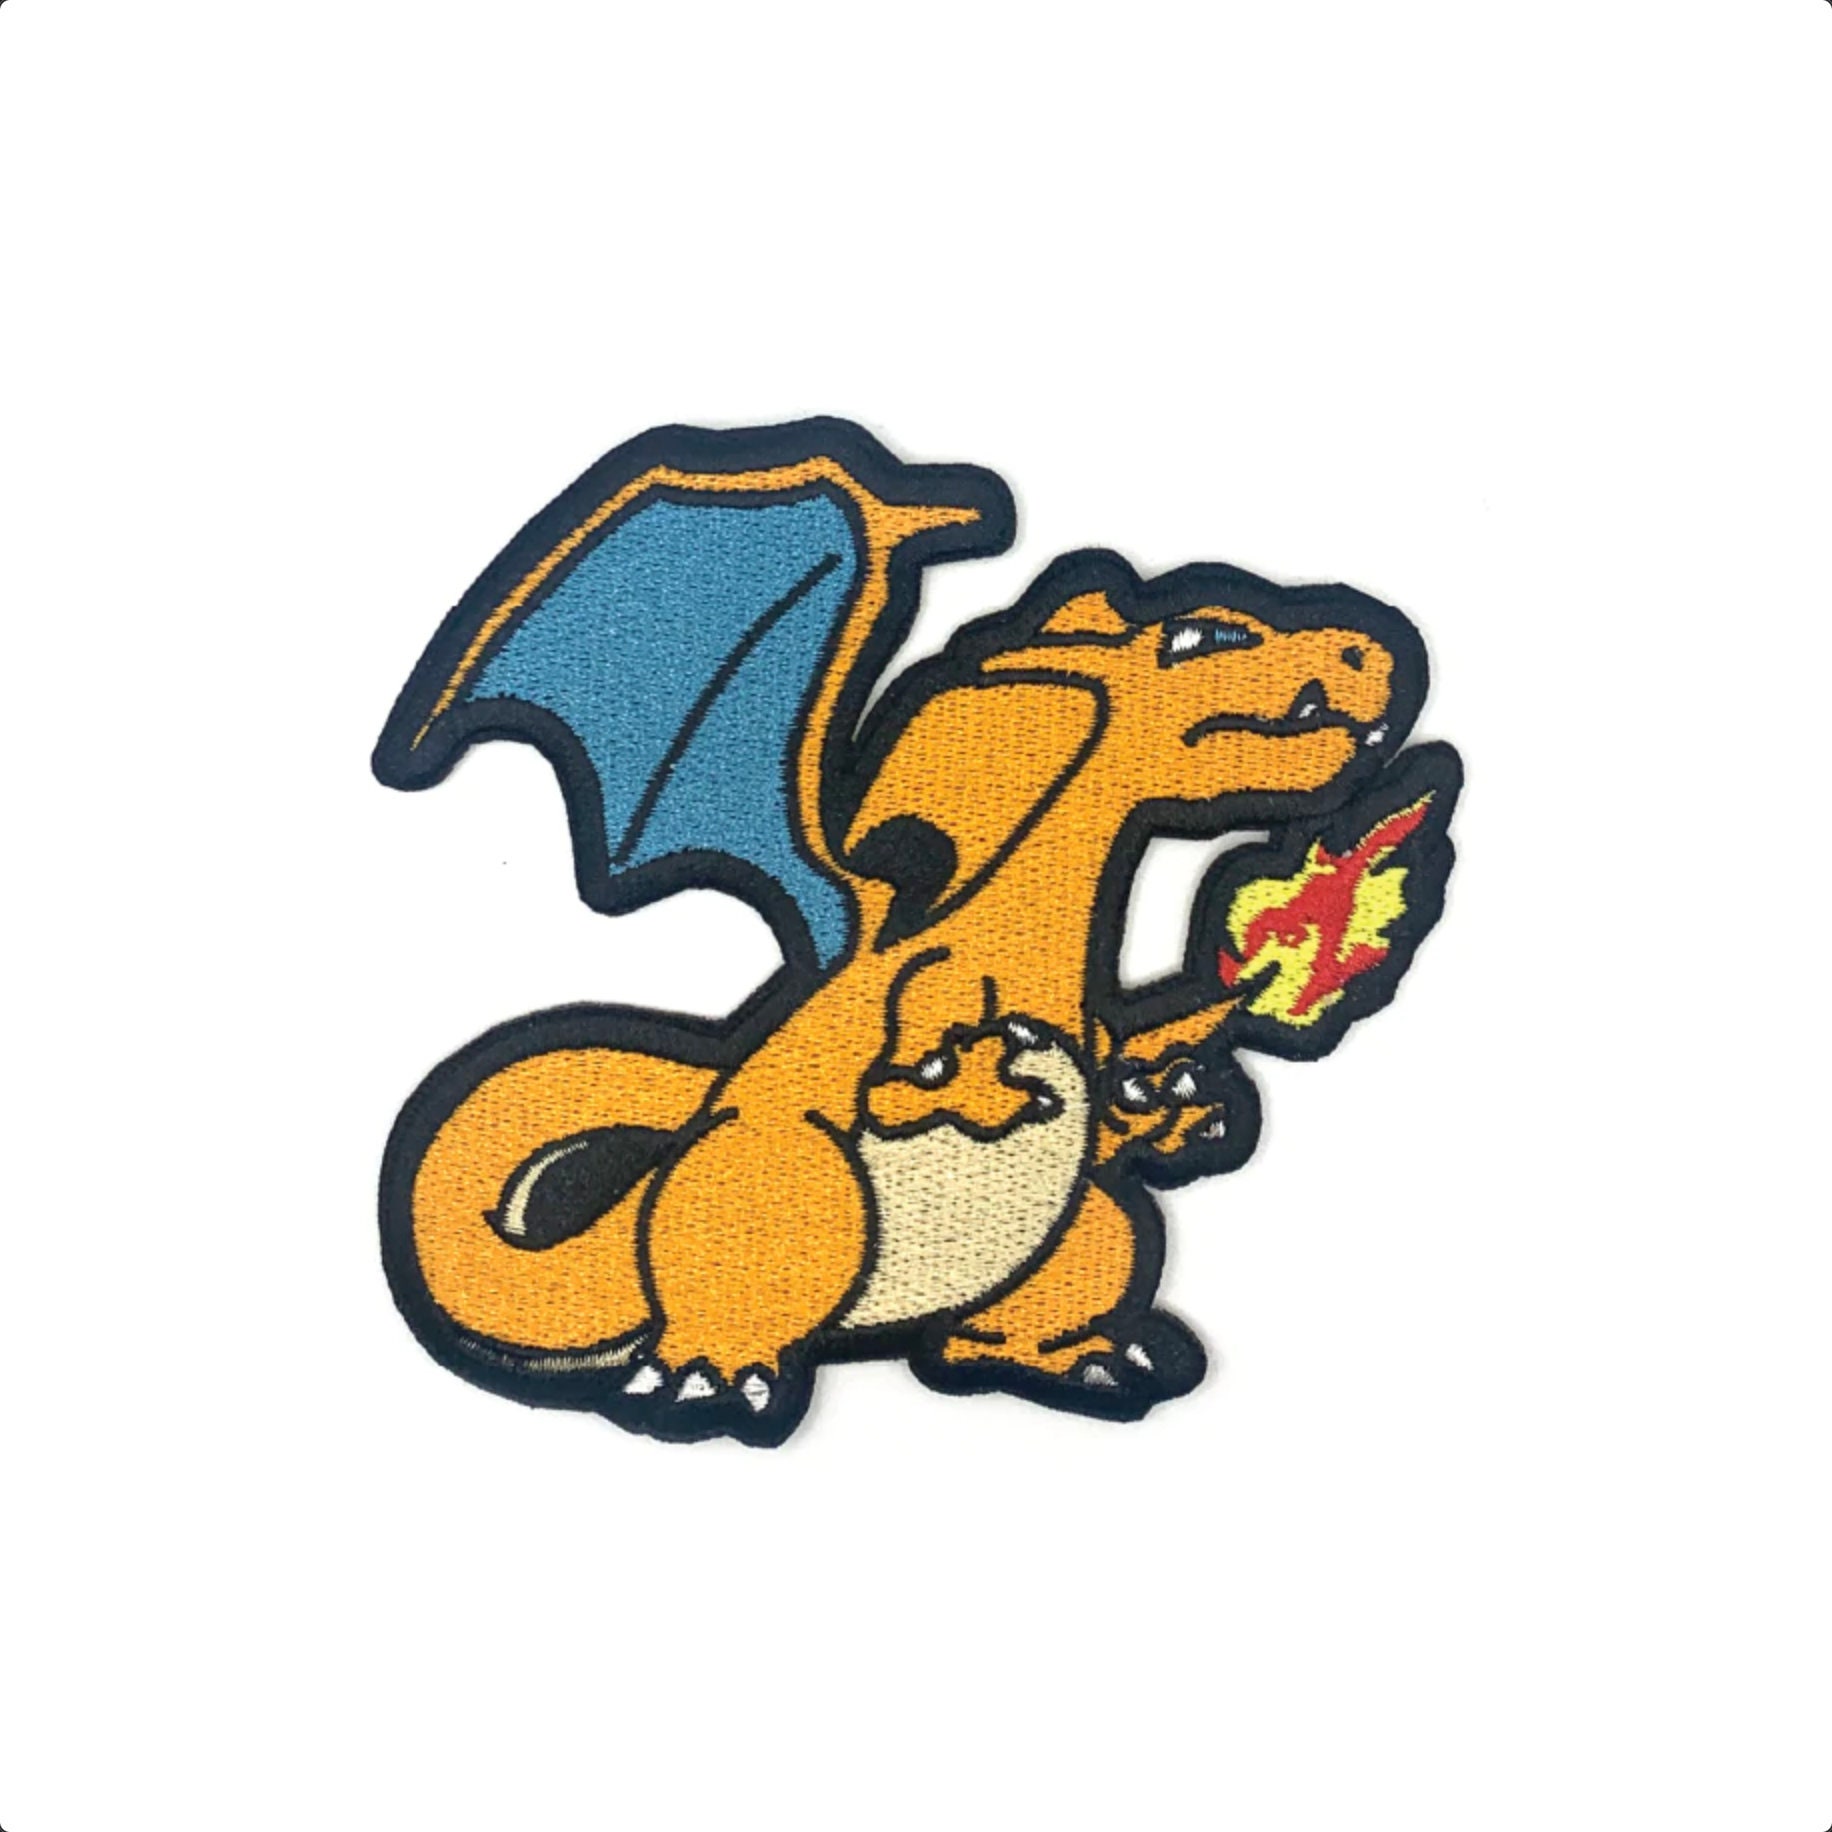 Shiny Mega Charizard Y - Iron on patch - Metallic Embroidered. Pokemon  patch.